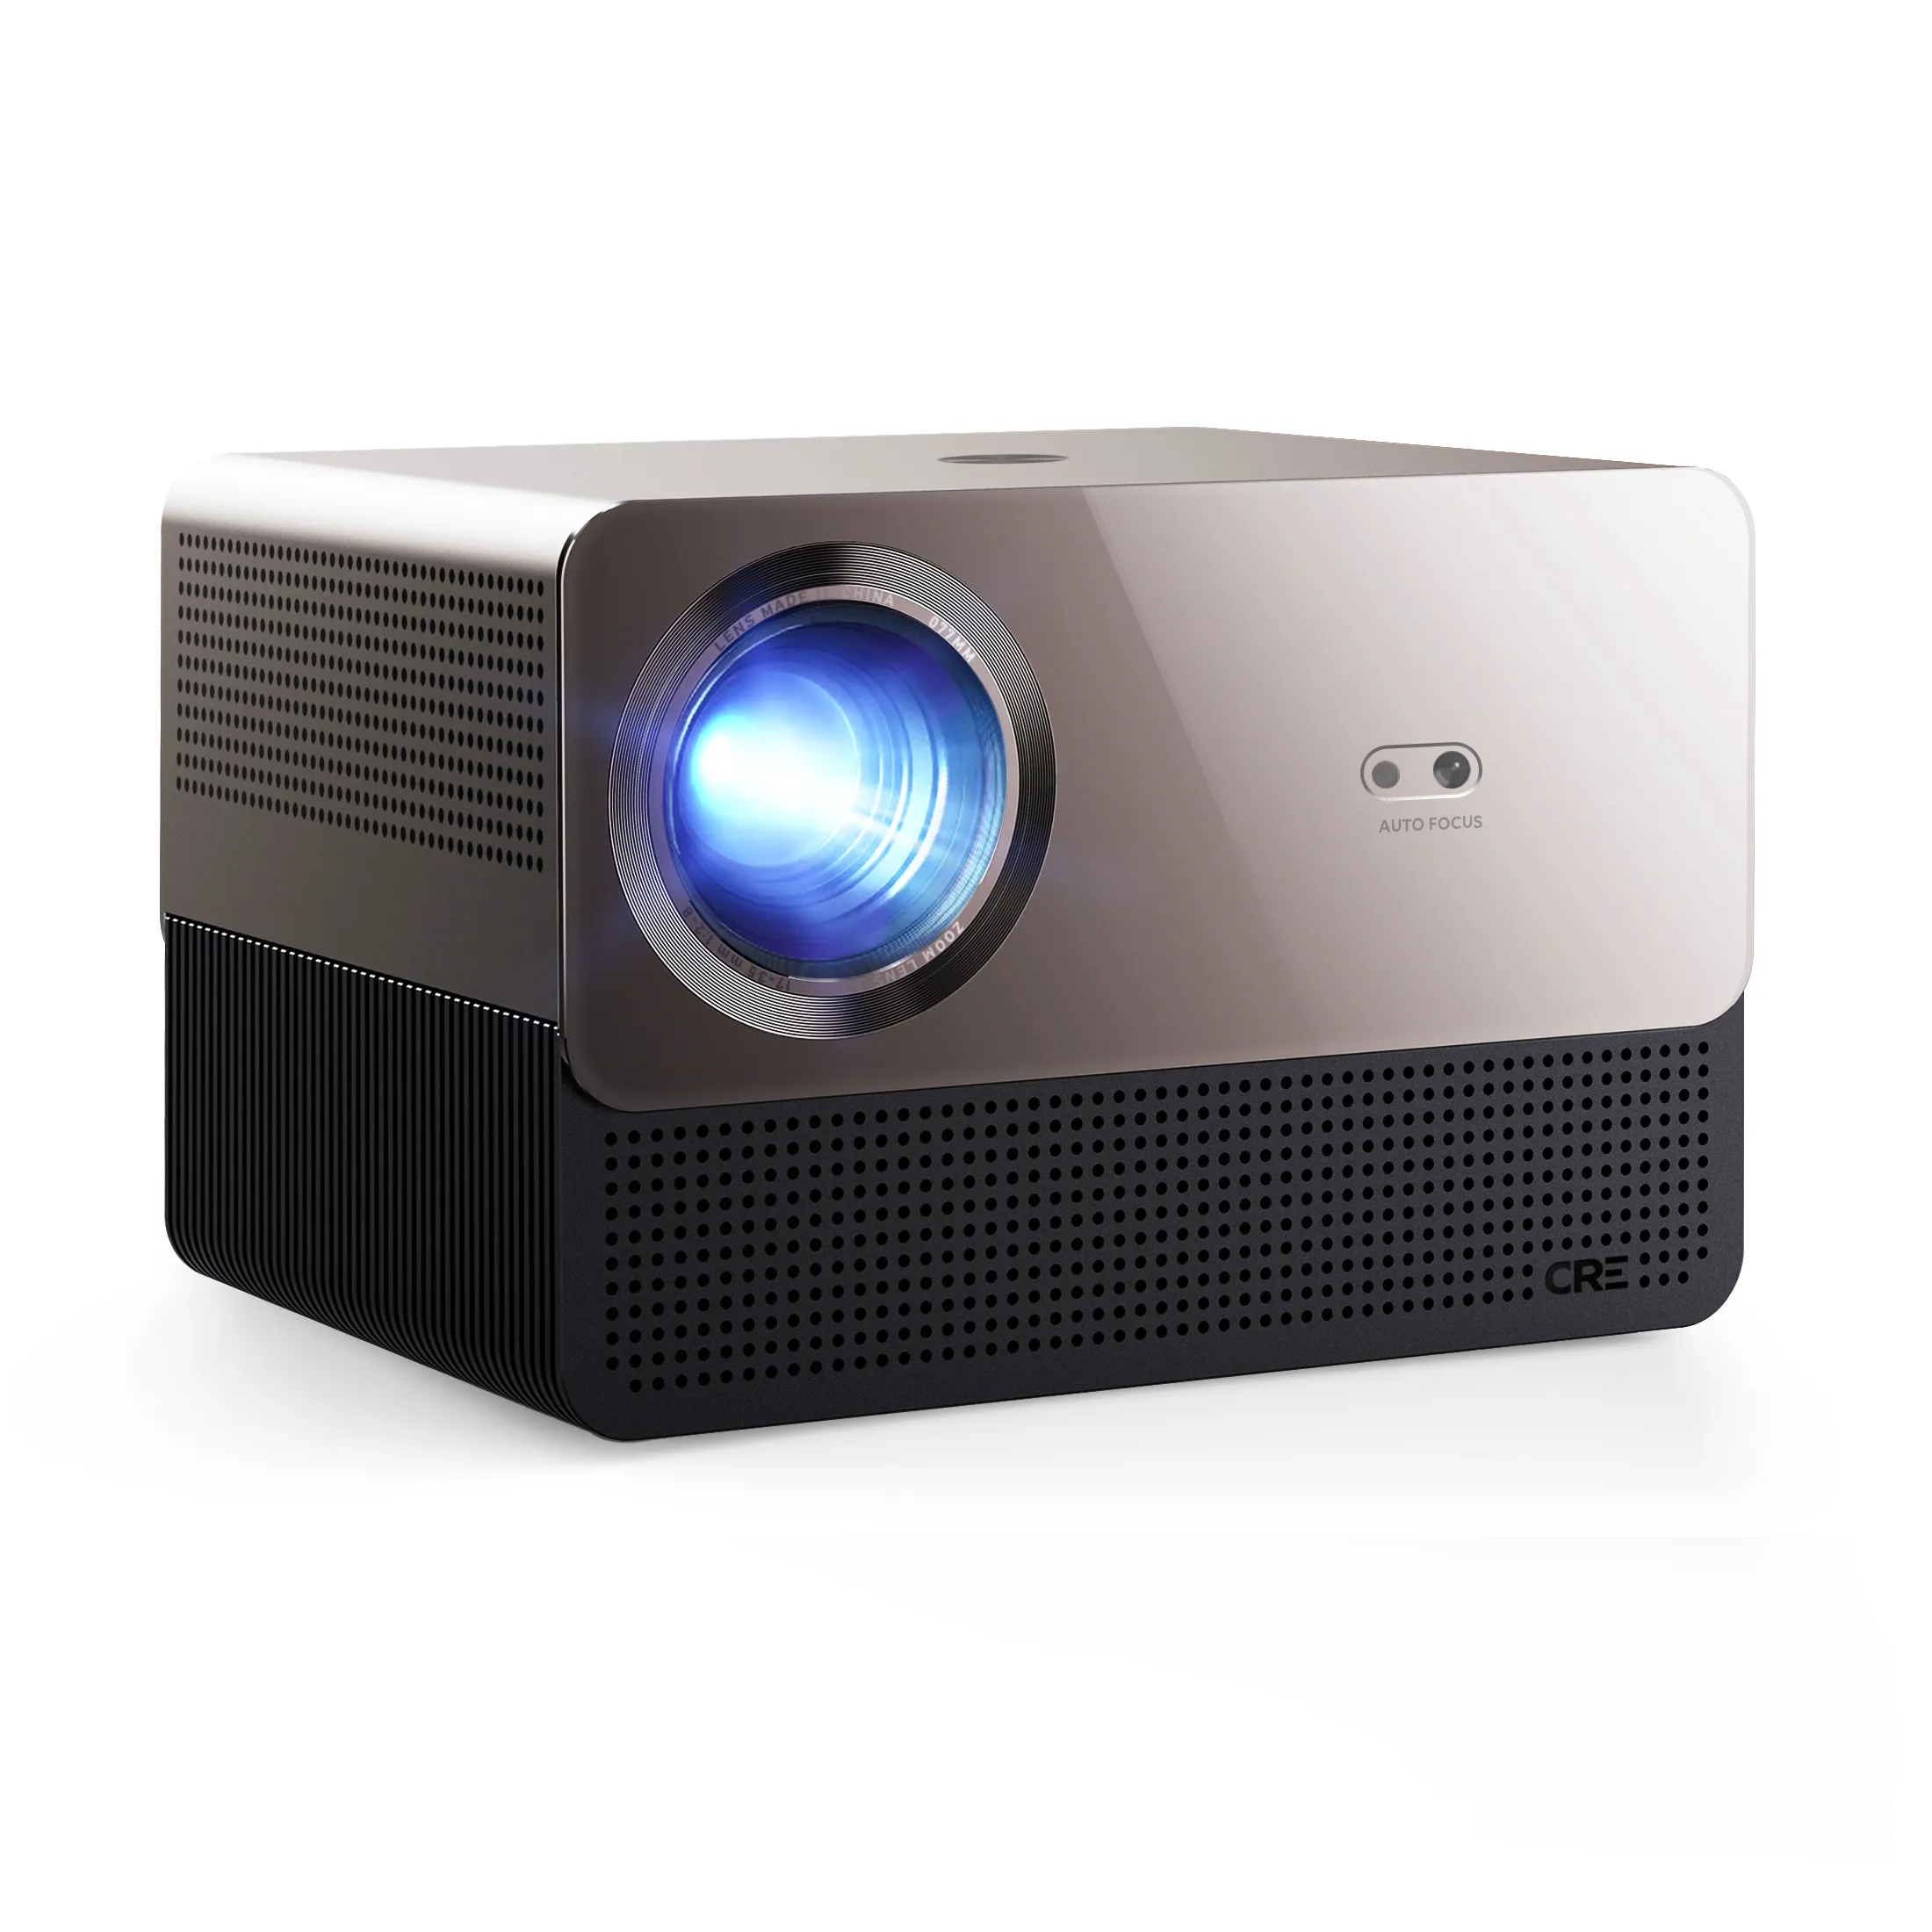 CRE OEM 1080P FHD Projector 750 ANSI Lumens Android 9.0 Smart video minbi Projector Home Theater hotel Projector use day time